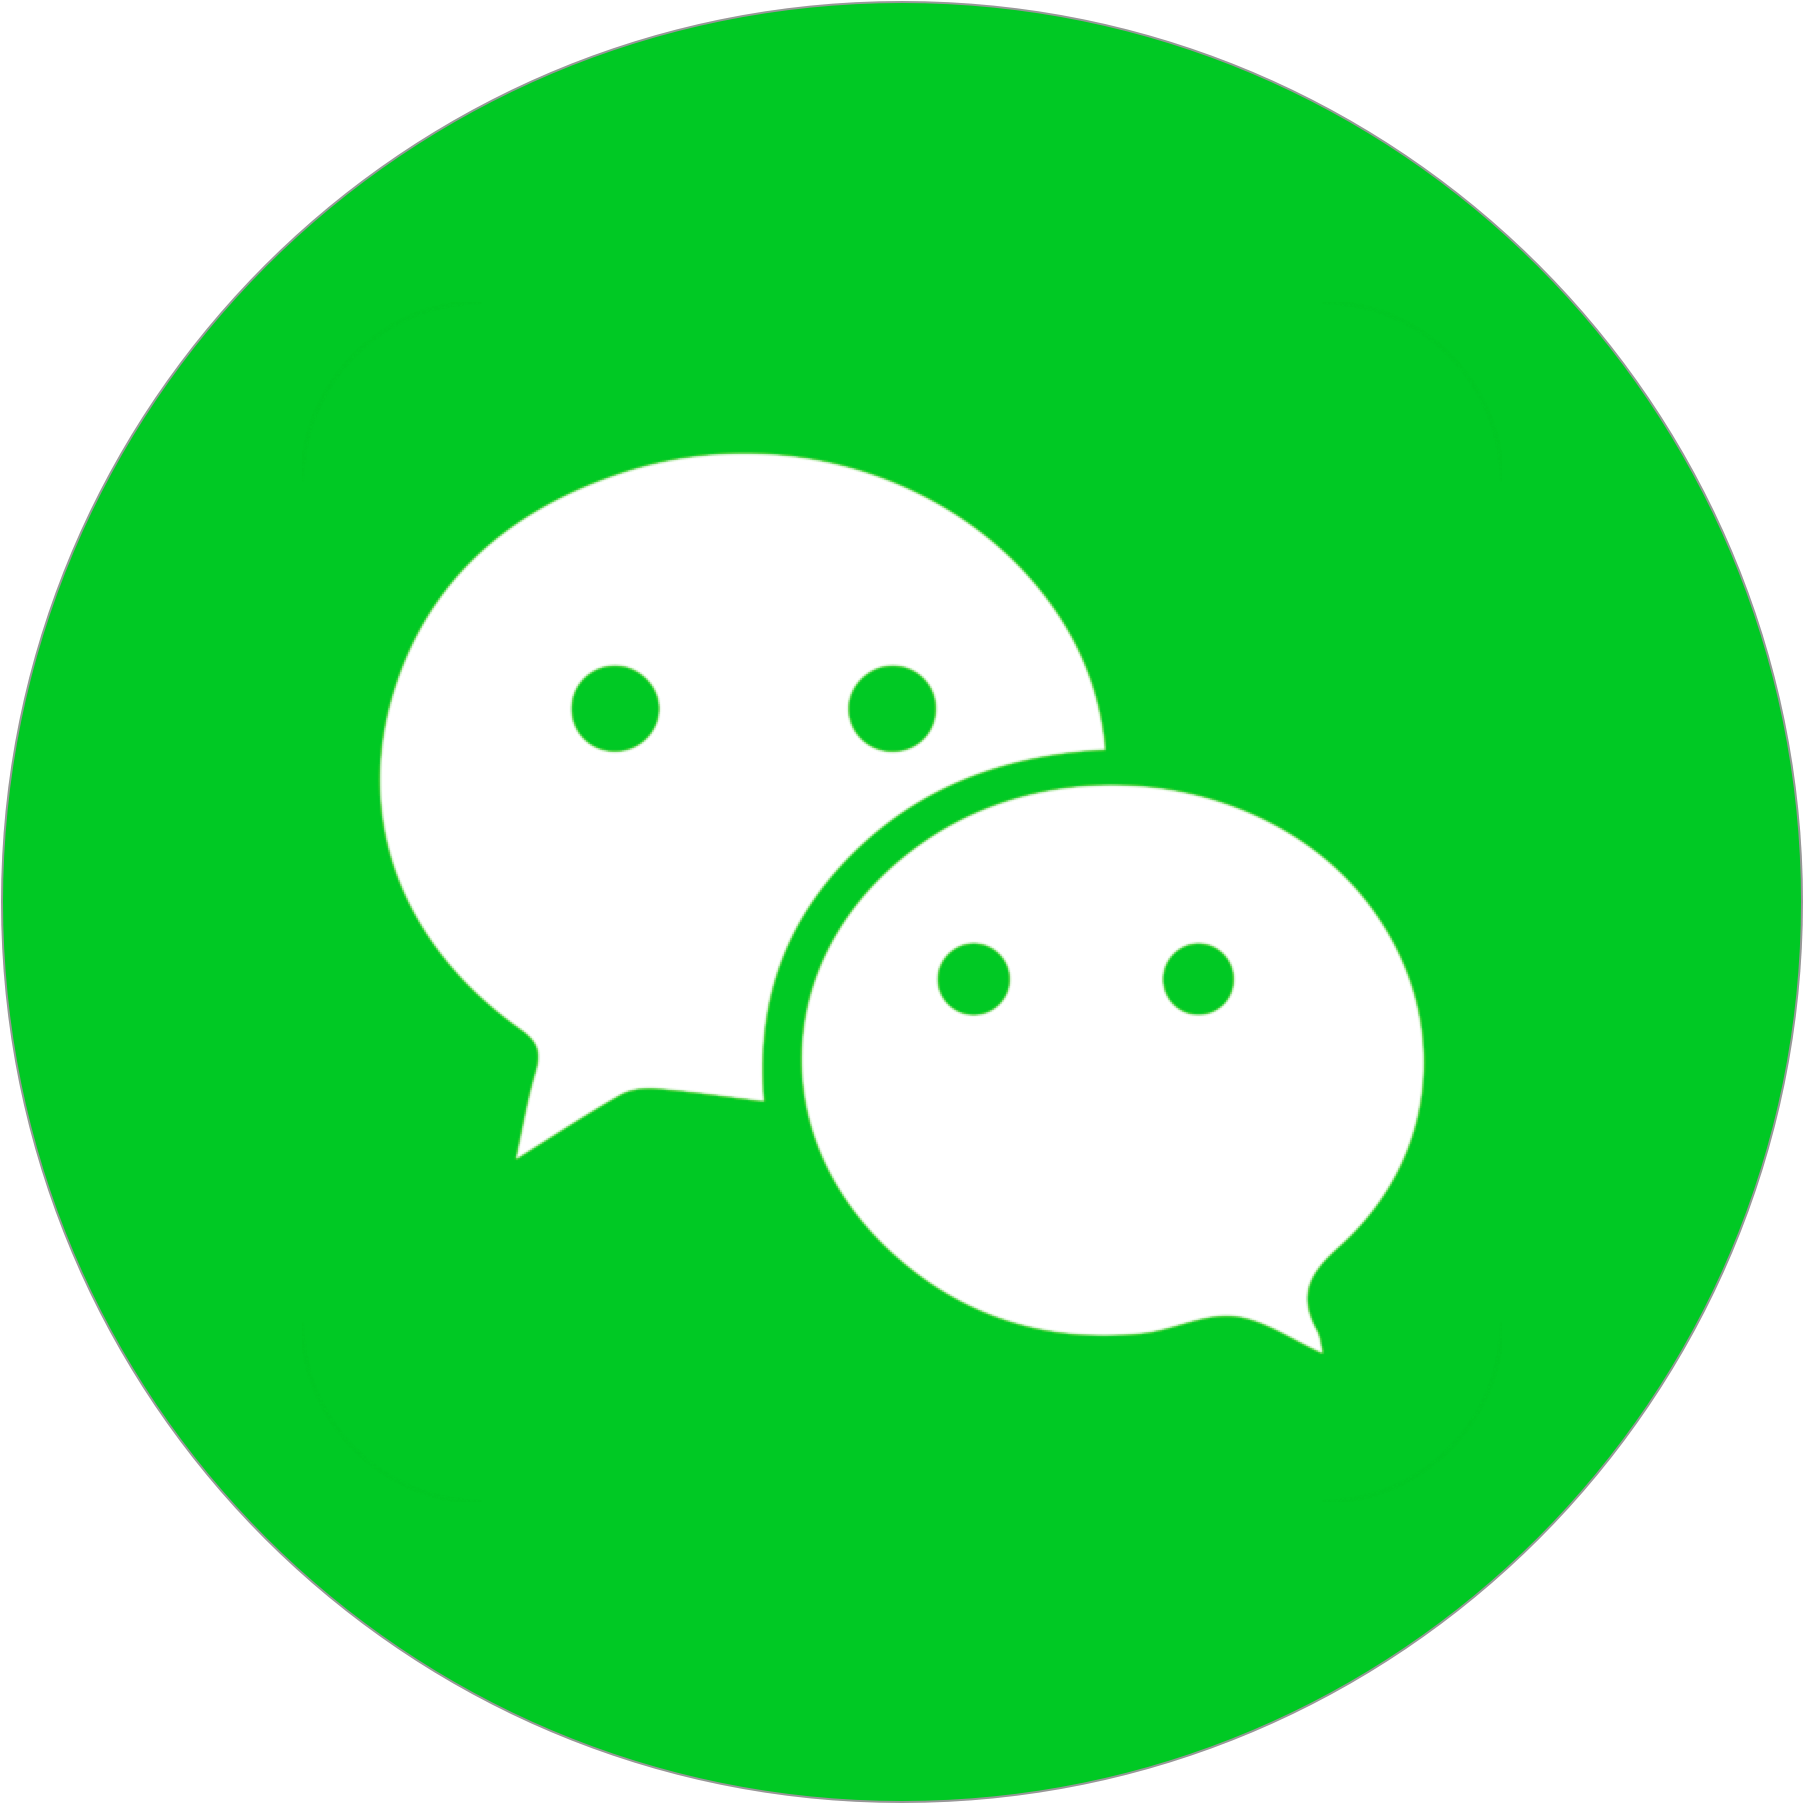 Wechat Logo - WeChat Share Button: How to Add to Your Website